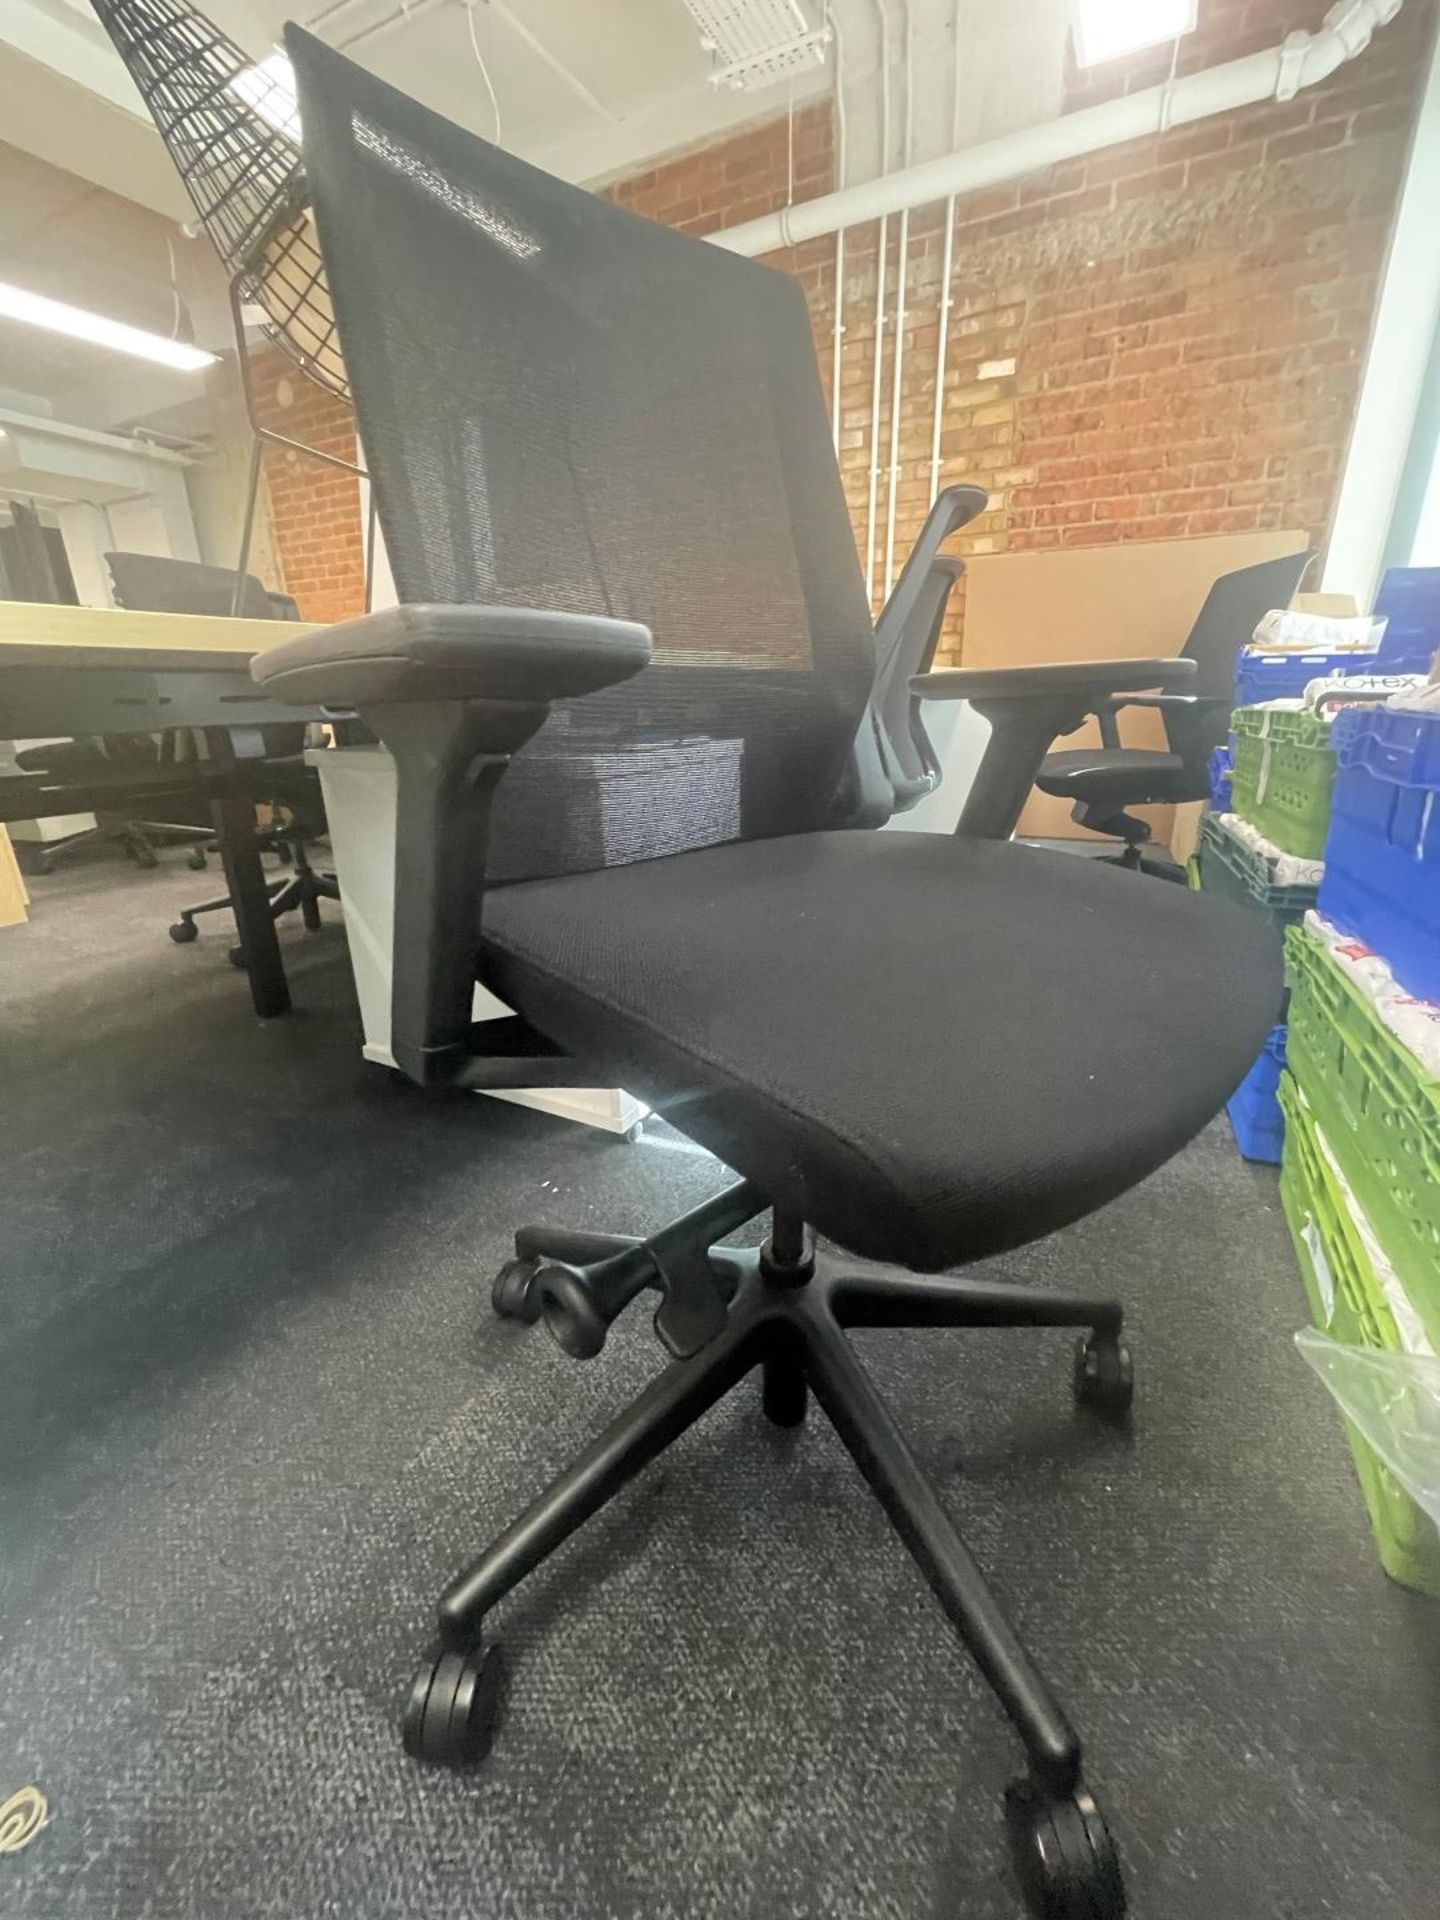 10 x BESTUHL J1 Ergonomic Office Chairs - To Be Removed From An Executive Office Environment - - Image 7 of 15